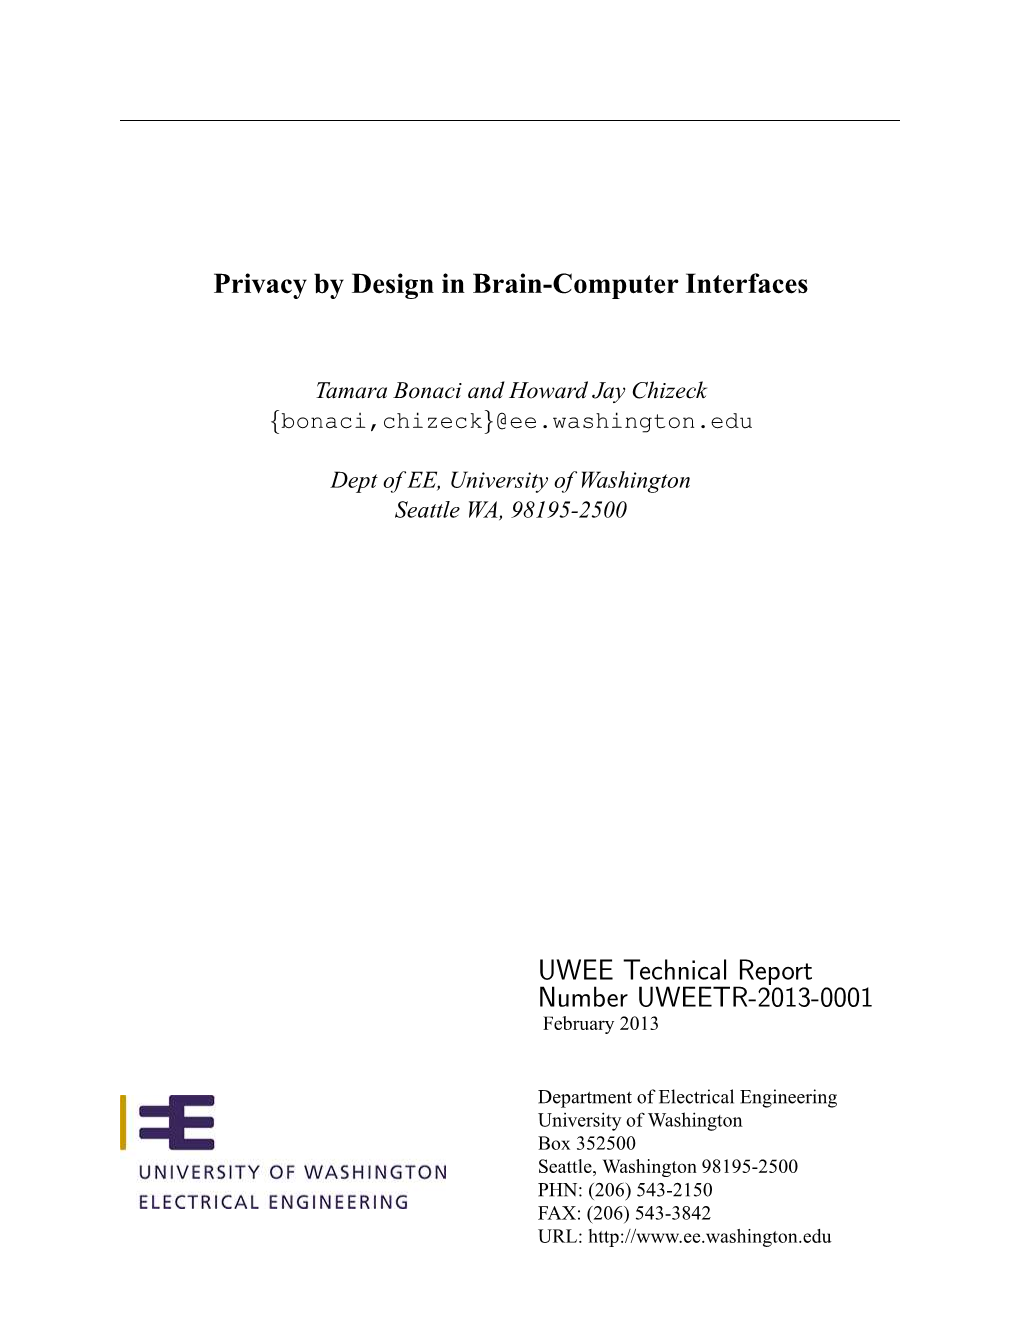 Privacy by Design in Brain-Computer Interfaces UWEE Technical Report